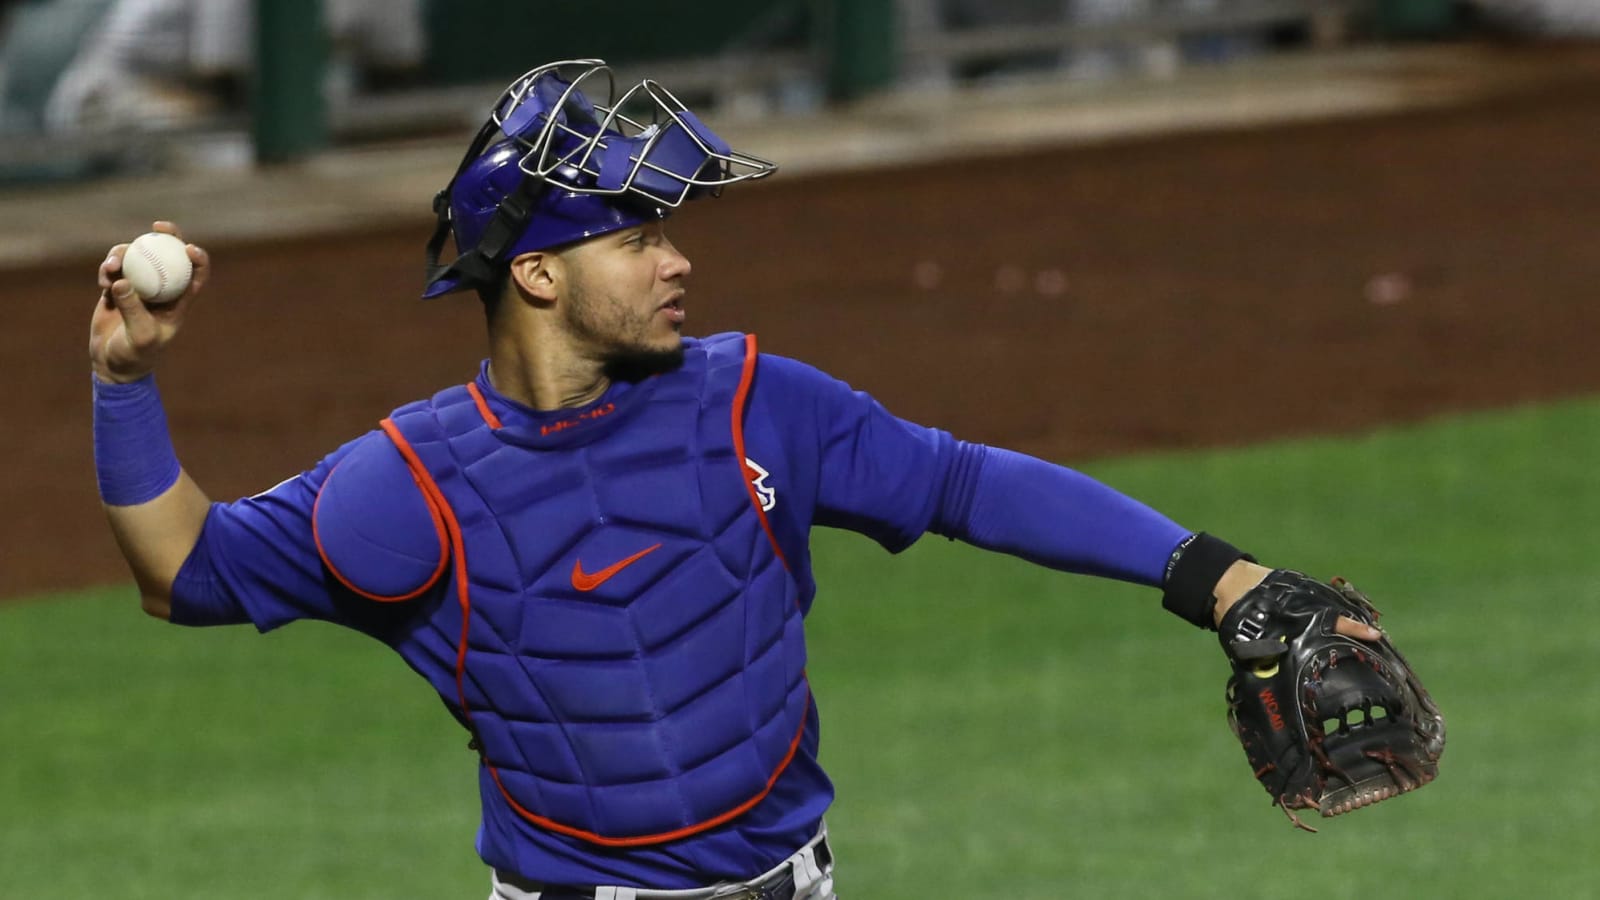 Report: Angels interested in trading for Cubs' Contreras